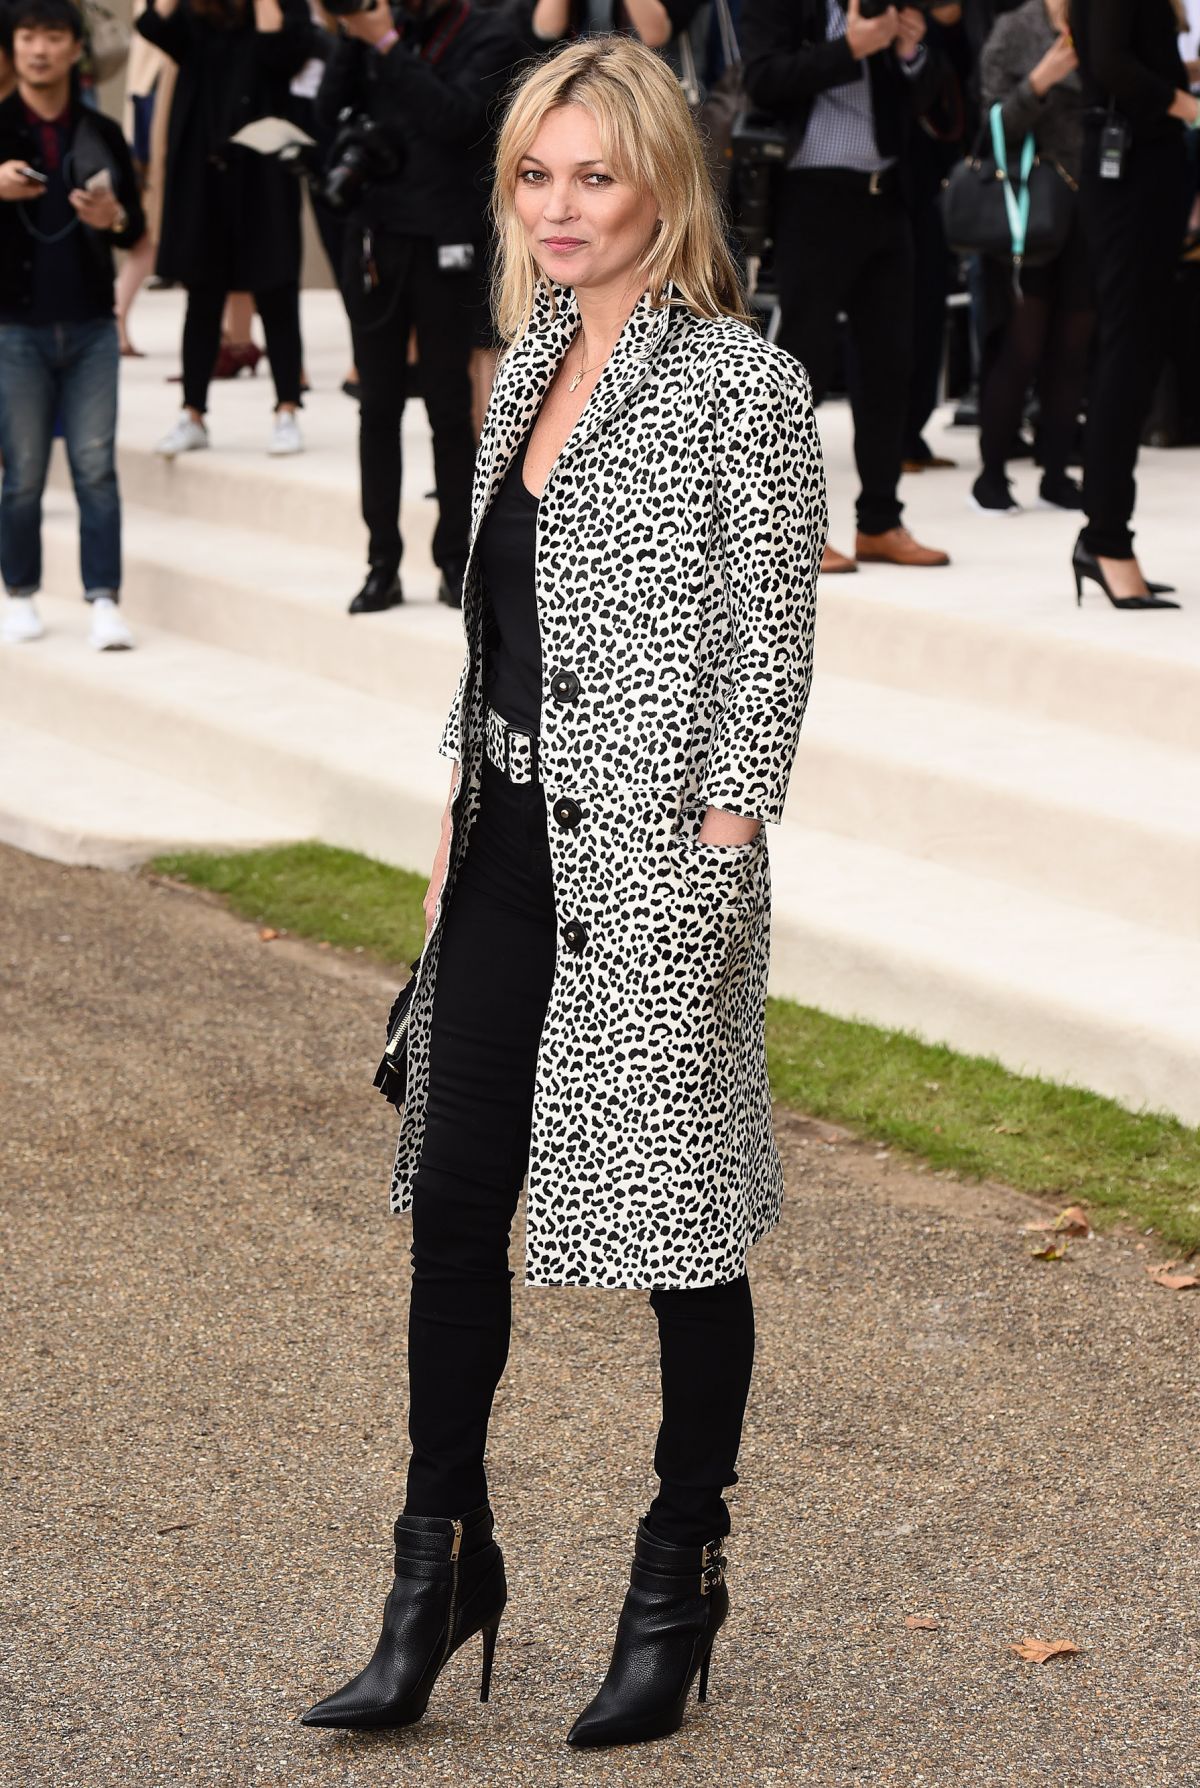 KATE MOSS at Burberry Prorsum Fashion Show in London 09/21/2015 ...